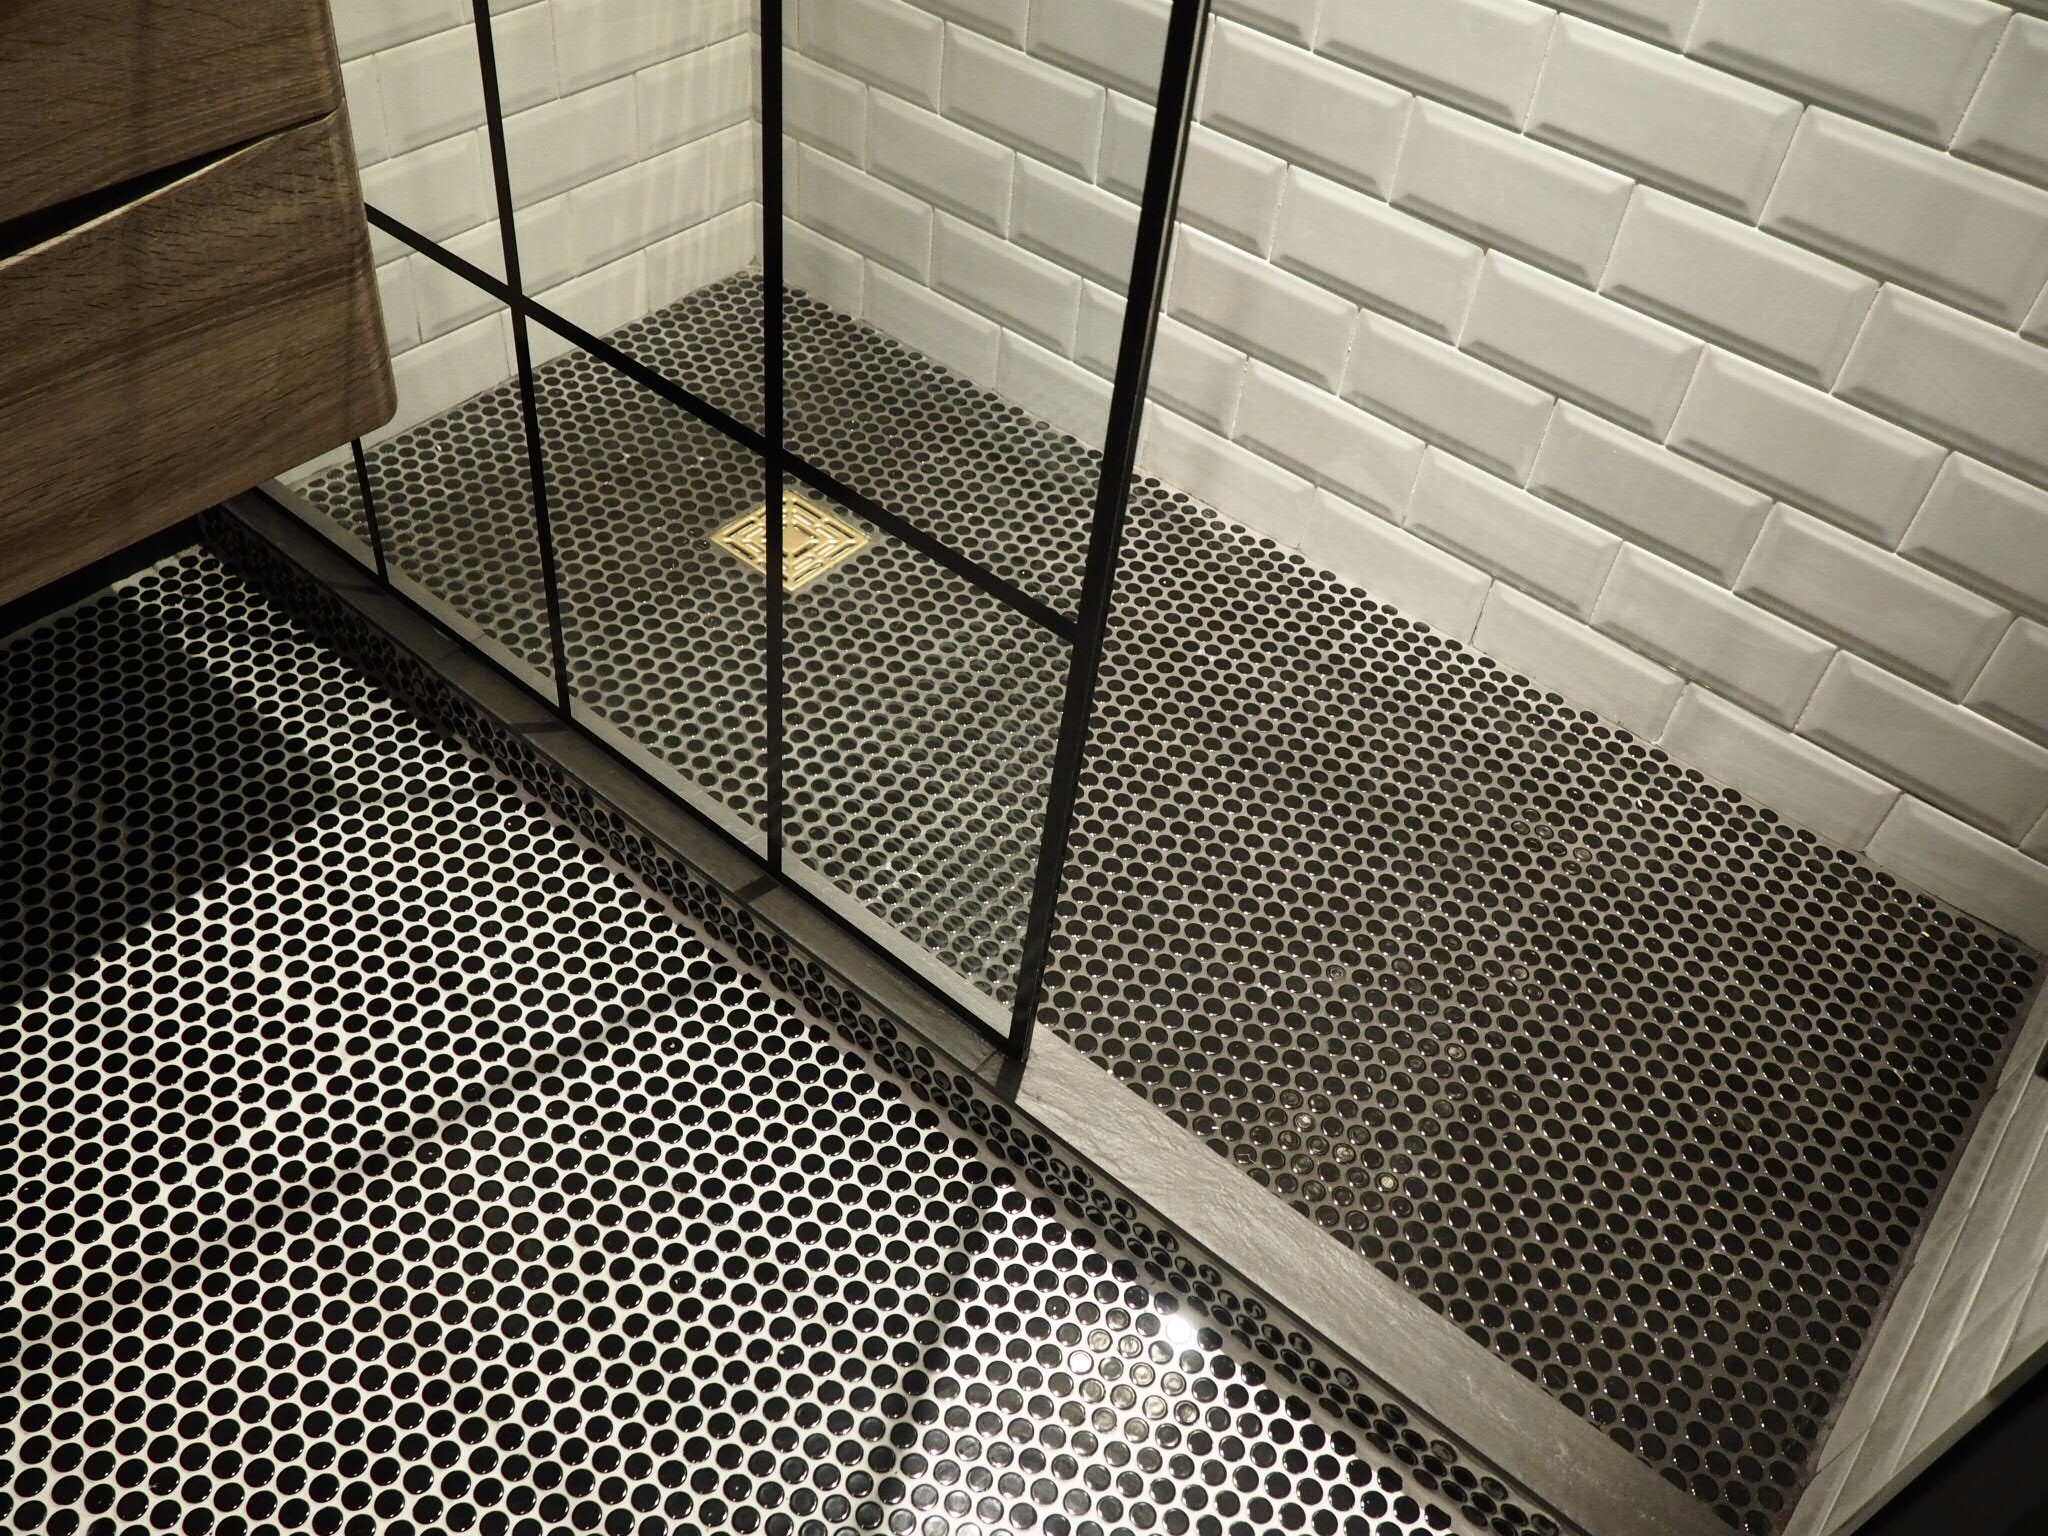 Shower floor using black polished penny tiles with a slate step, white grout on the main floor and black grout in the shower. Crittal style shower screen just seen